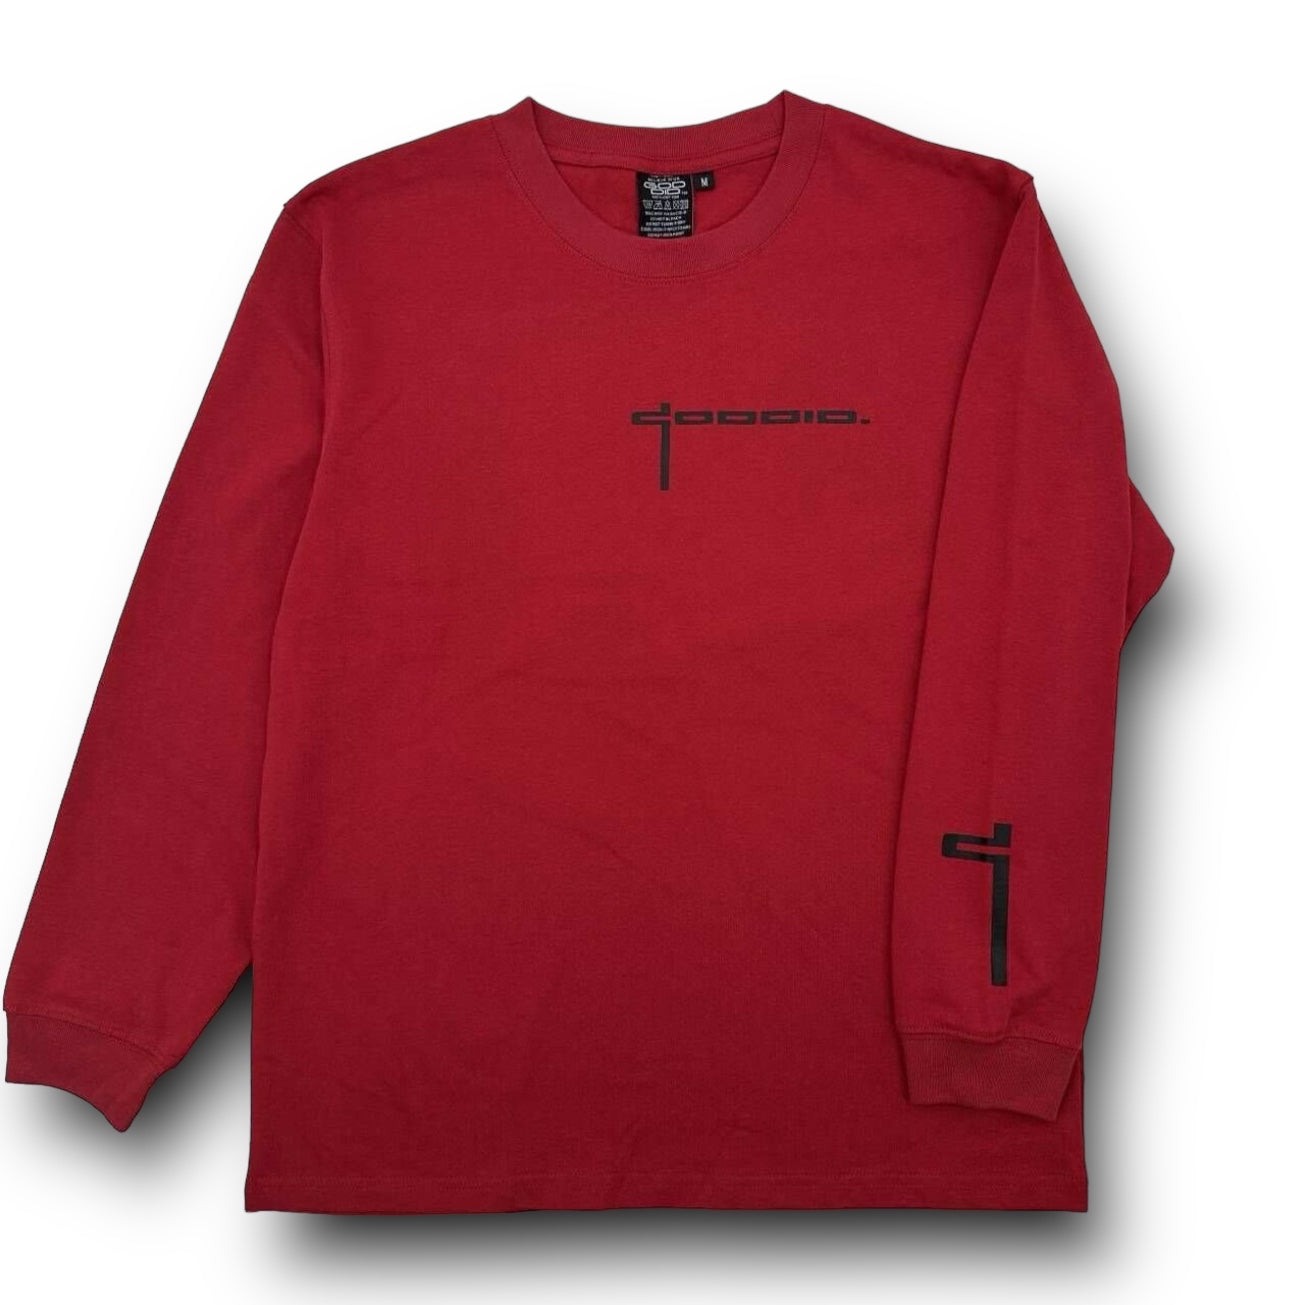 God did. Long sleeve Red